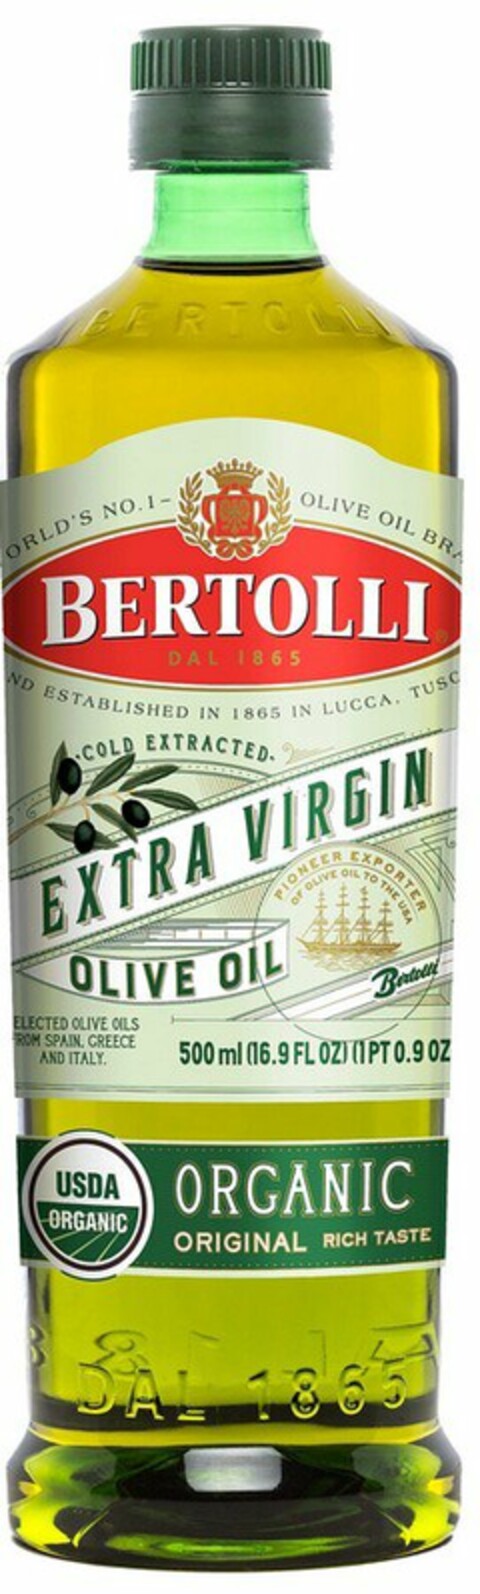 BERTOLLI DAL 1865 WORLD'S NO. 1 OLIVE OIL BRAND BRAND ESTABLISHED IN 1865 IN LUCCA, TUSCANY COLD EXTRACTED EXTRA VIRGIN OLIVE OIL SELECTED OLIVE OILS FROM SPAIN AND TUNISIA. PIONEER EXPORTER OF OLIVE OIL TO THE USA USDA ORGANIC ORGANIC ORIGINAL RICH TASTE 500 ML (16.9 FL OZ) (1PT 0.9 OZ) Logo (USPTO, 04/27/2018)